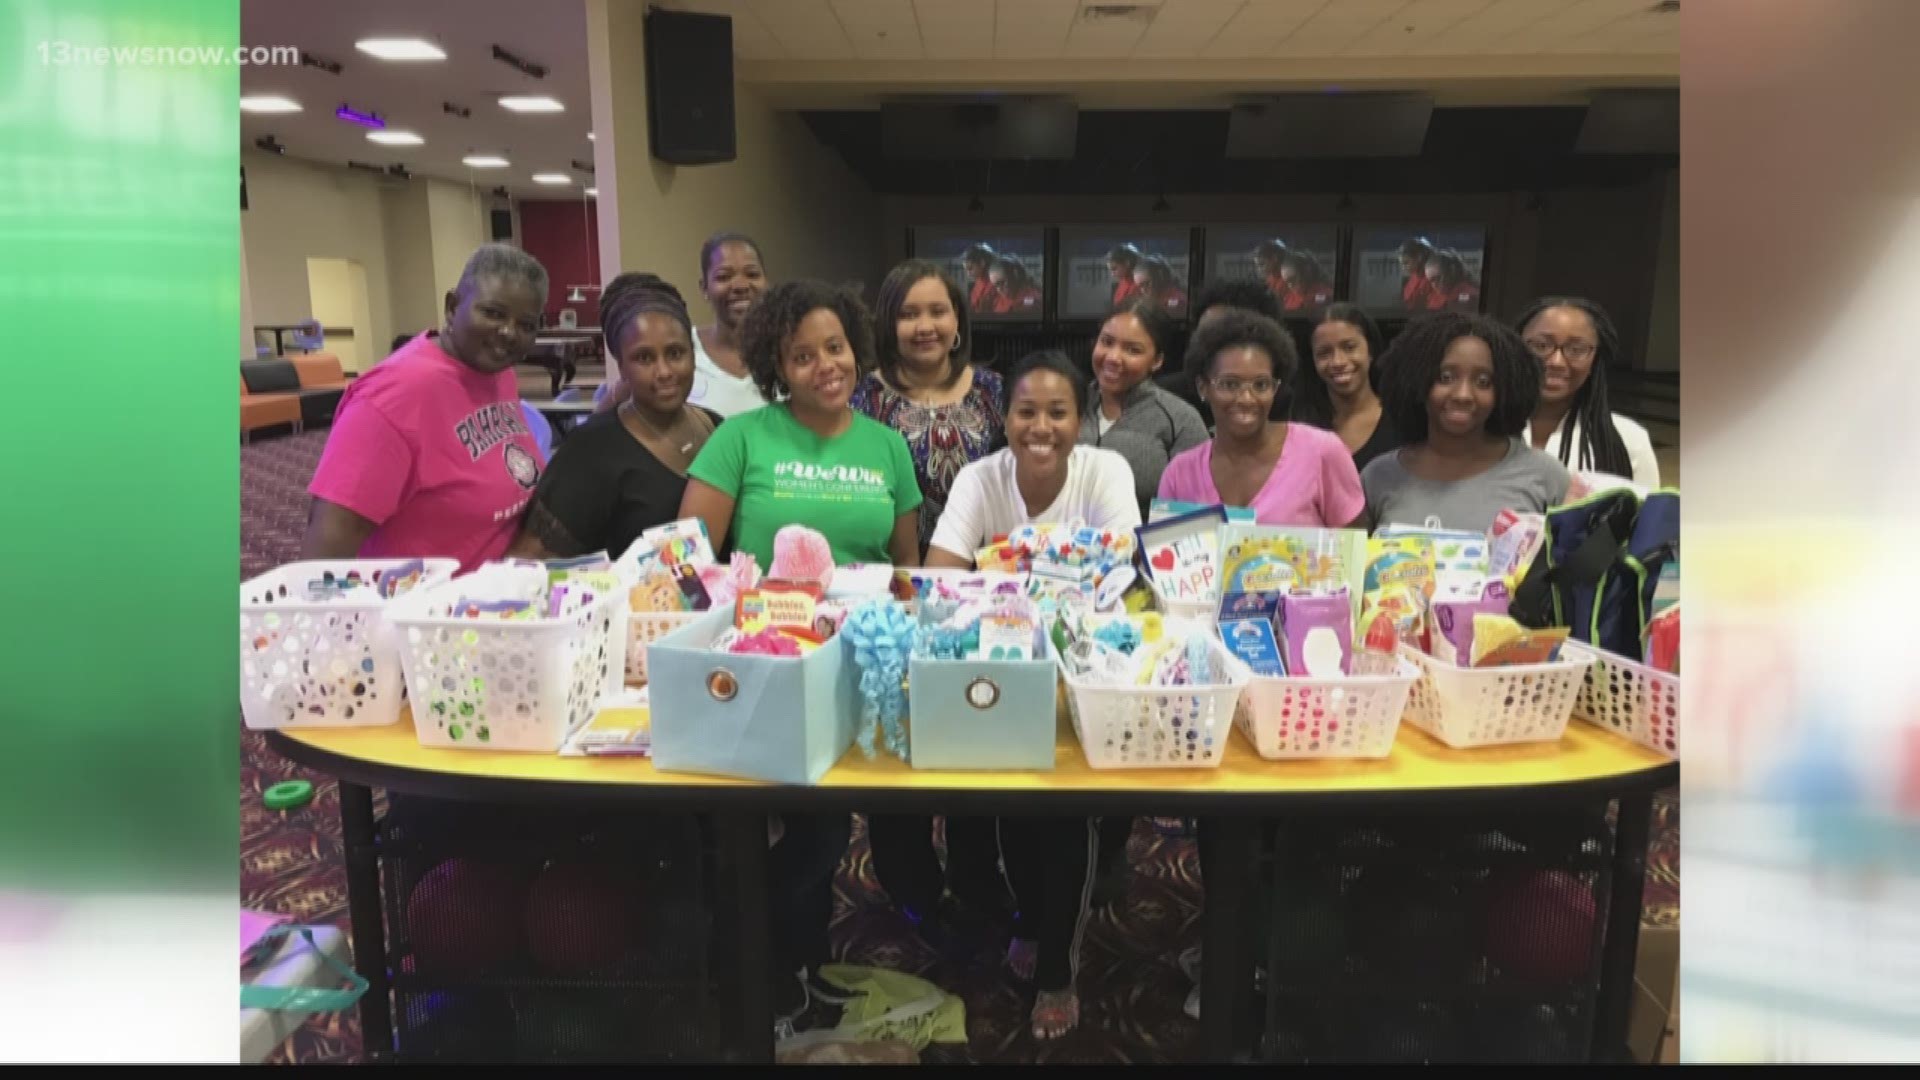 Local non-profit 'PurposeHer' is holding an event for first-time moms and low-income moms. It will help get them ready for their little ones.